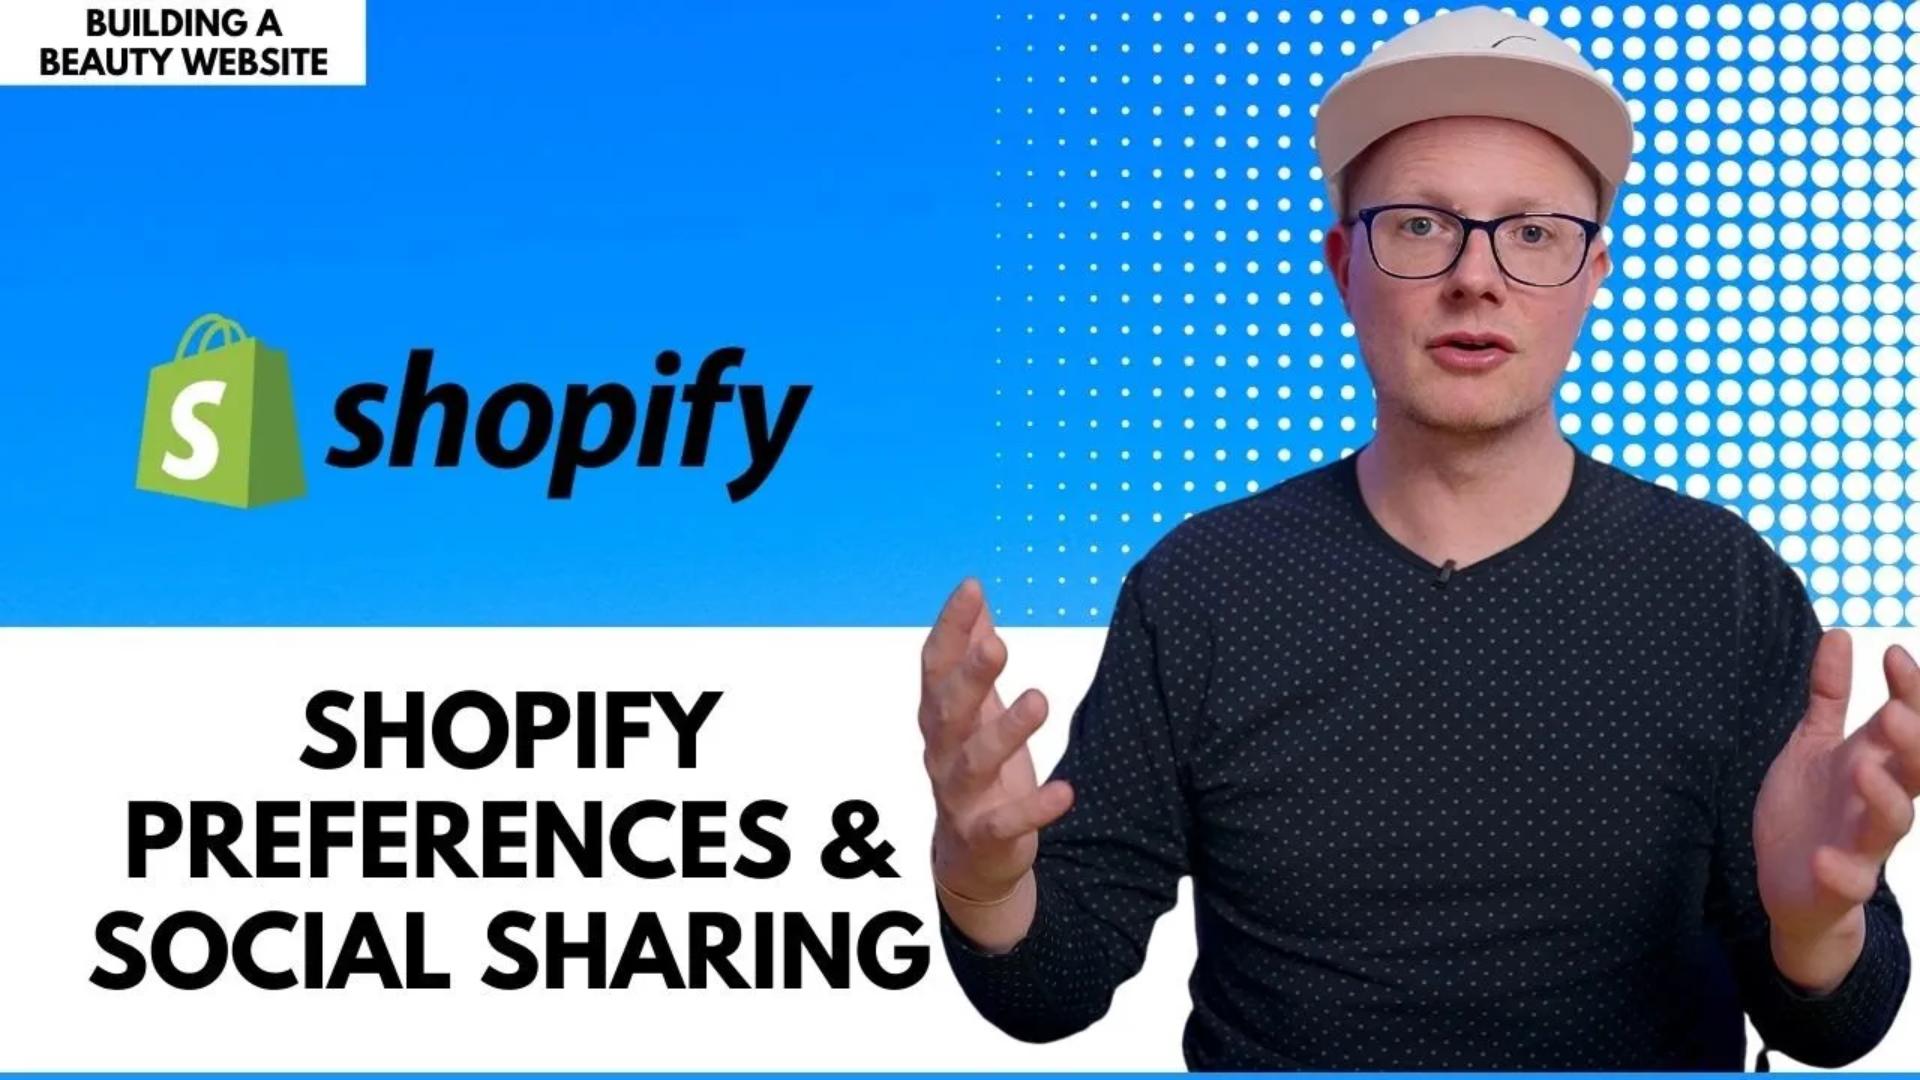 Building a Beauty Website: Shopify Preferences & Social Sharing (PT 5)